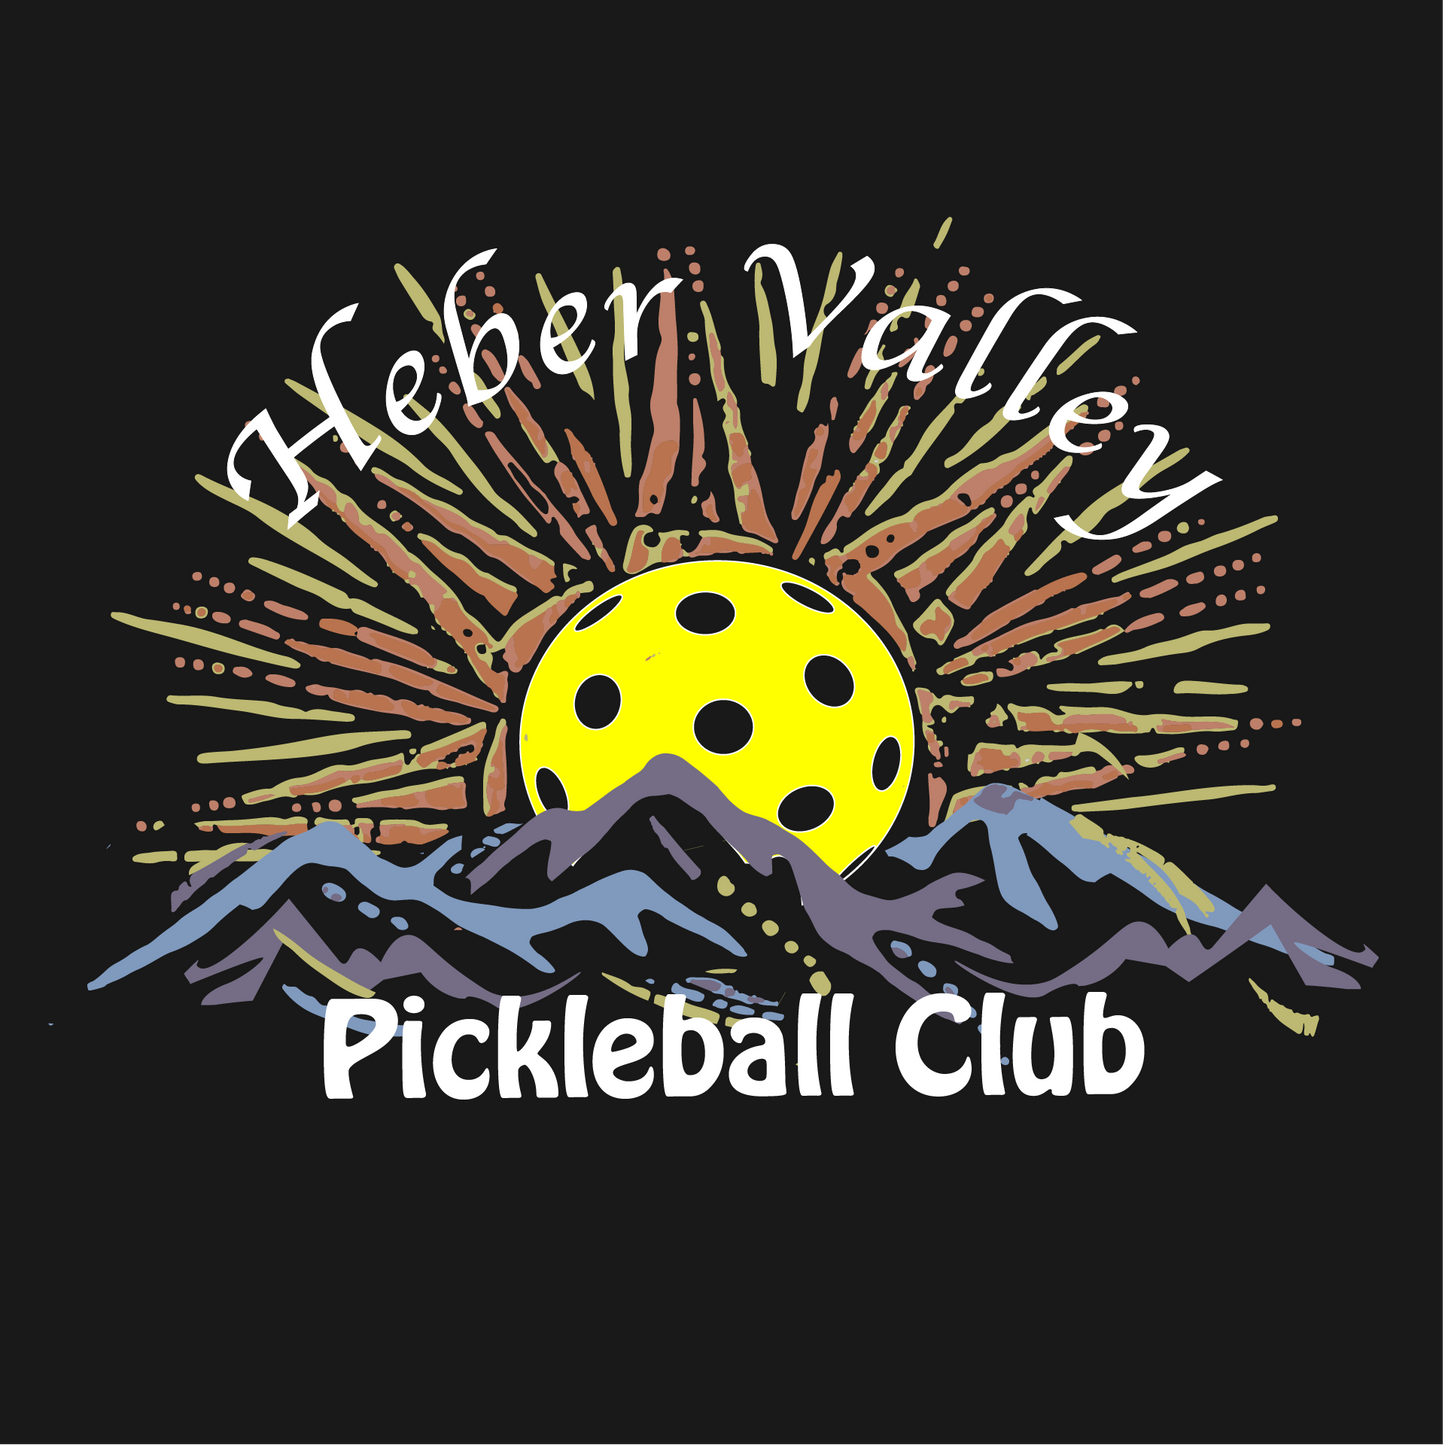 Heber Valley Pickleball Club (Large) | Women’s Short Sleeve Crewneck Athletic Shirts | 100% Polyester